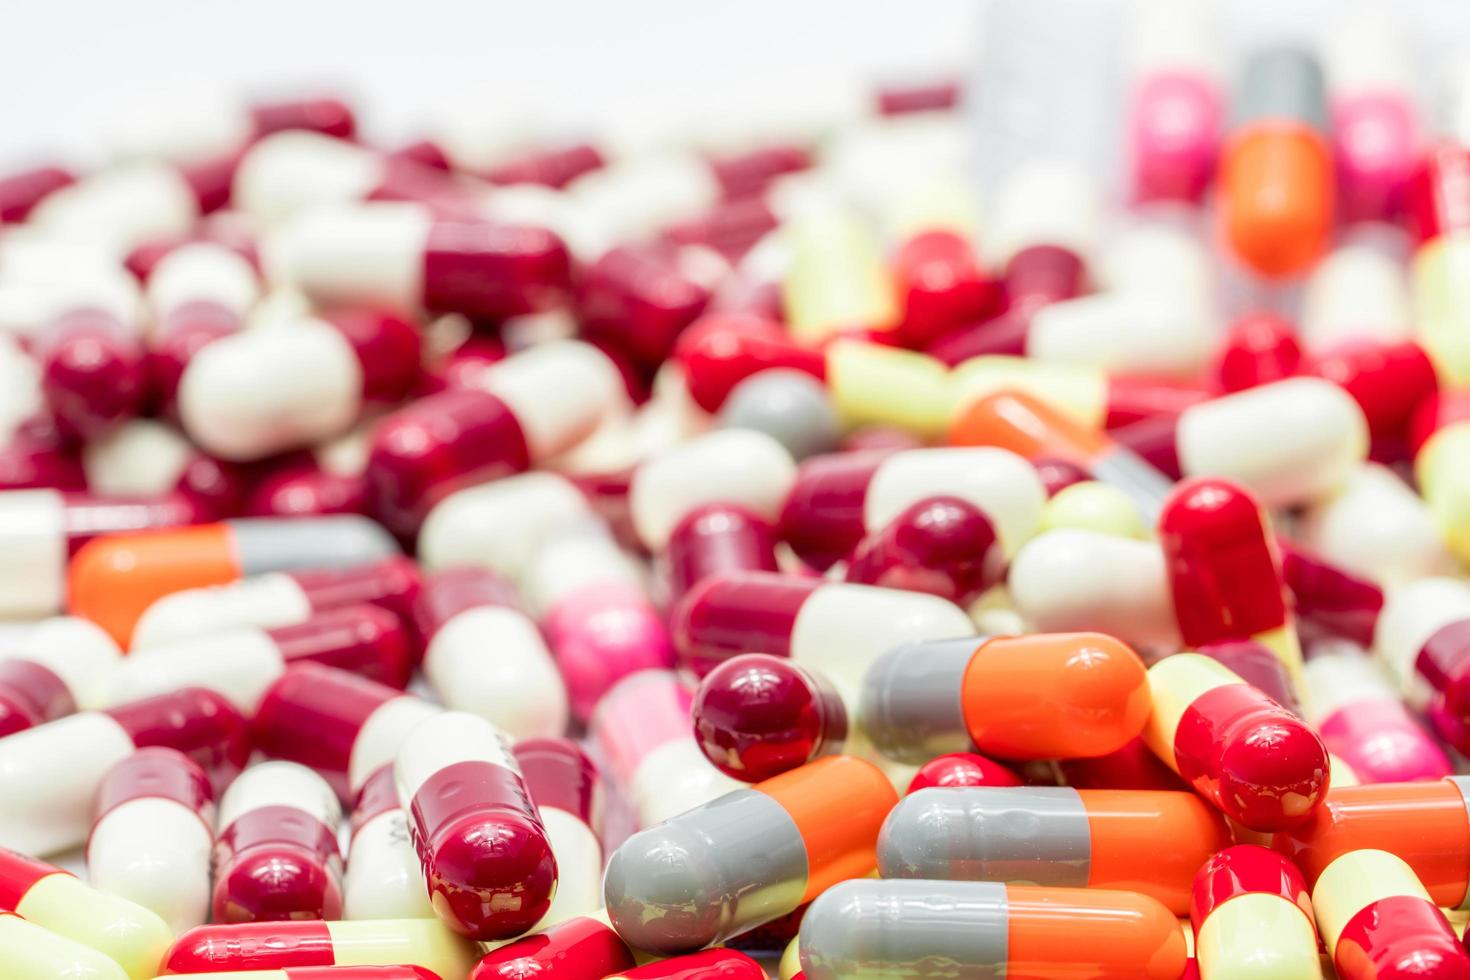 Selective focus on antibiotic capsule pills on blurred background of capsules. Pharmaceutical industry. Drug production. Global healthcare. Drug interaction. Antibiotic drug resistance and overuse. photo